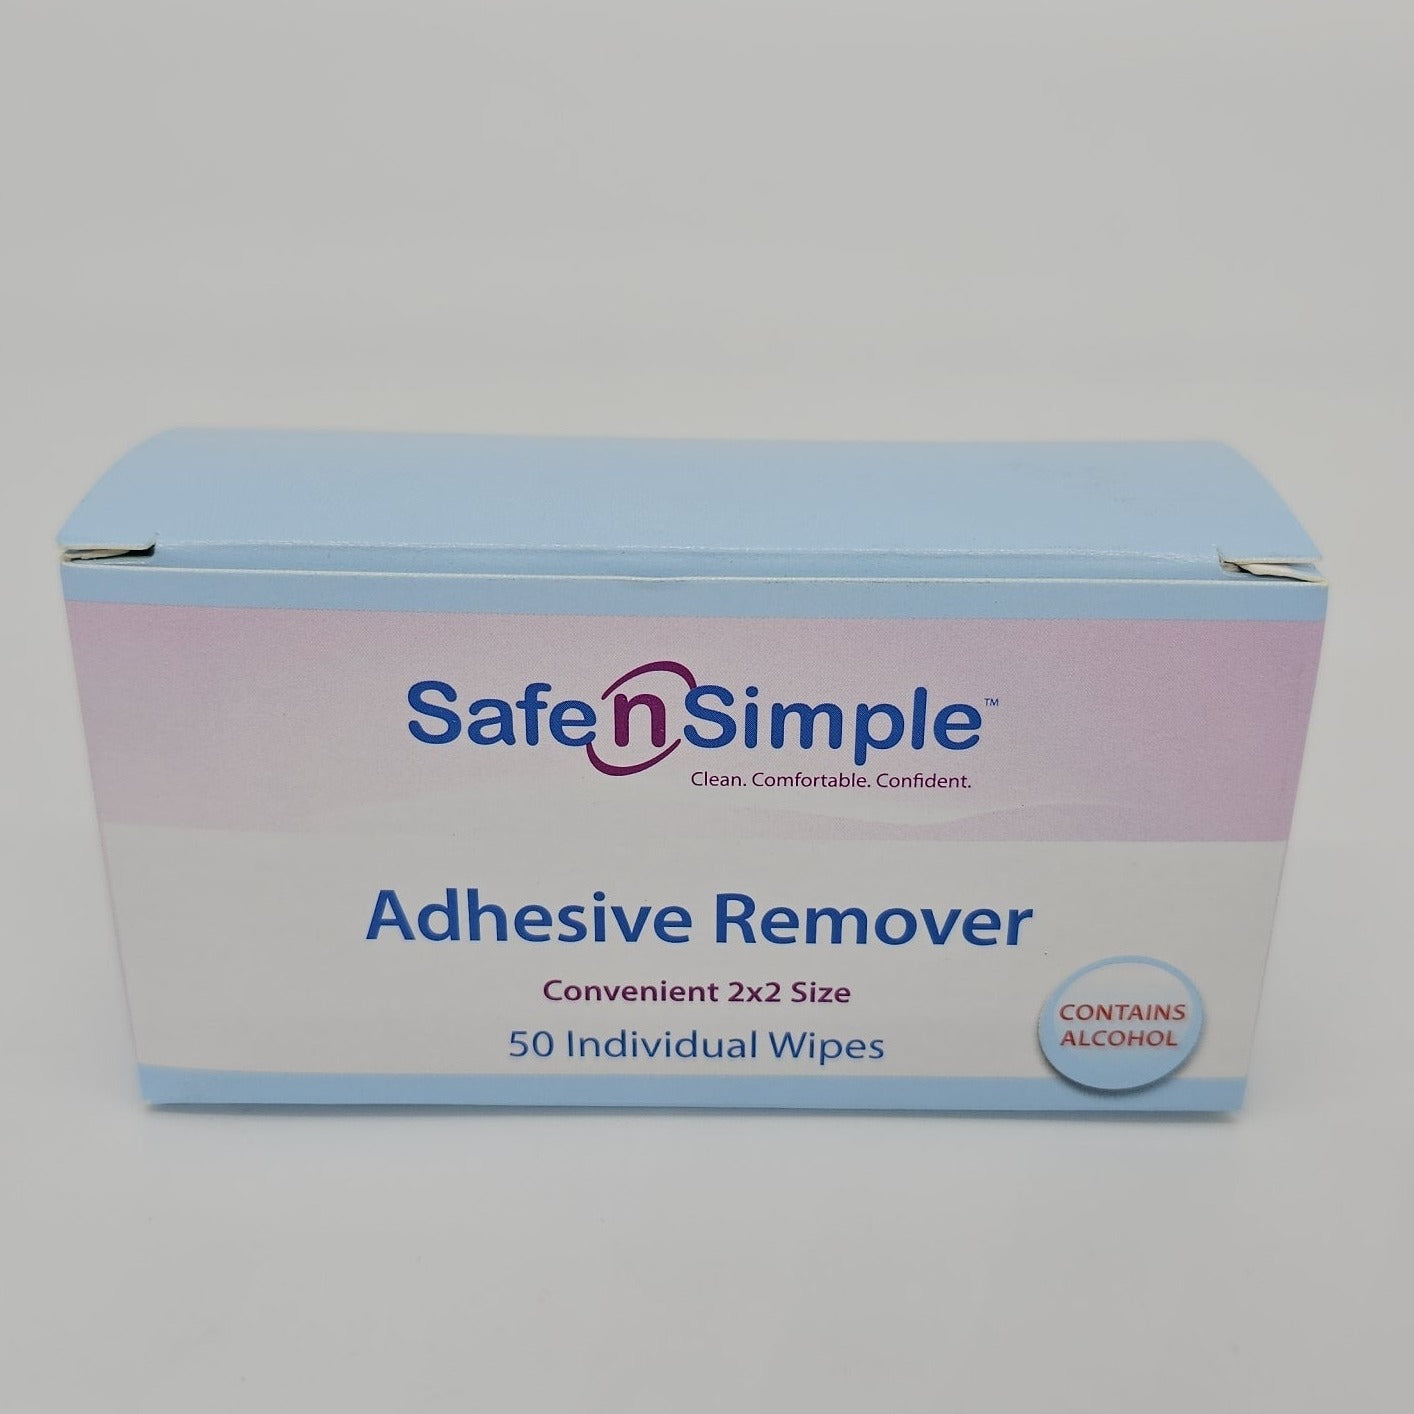 UniSolve™ Adhesive Remover Wipes, 50-Pack – Step2Health